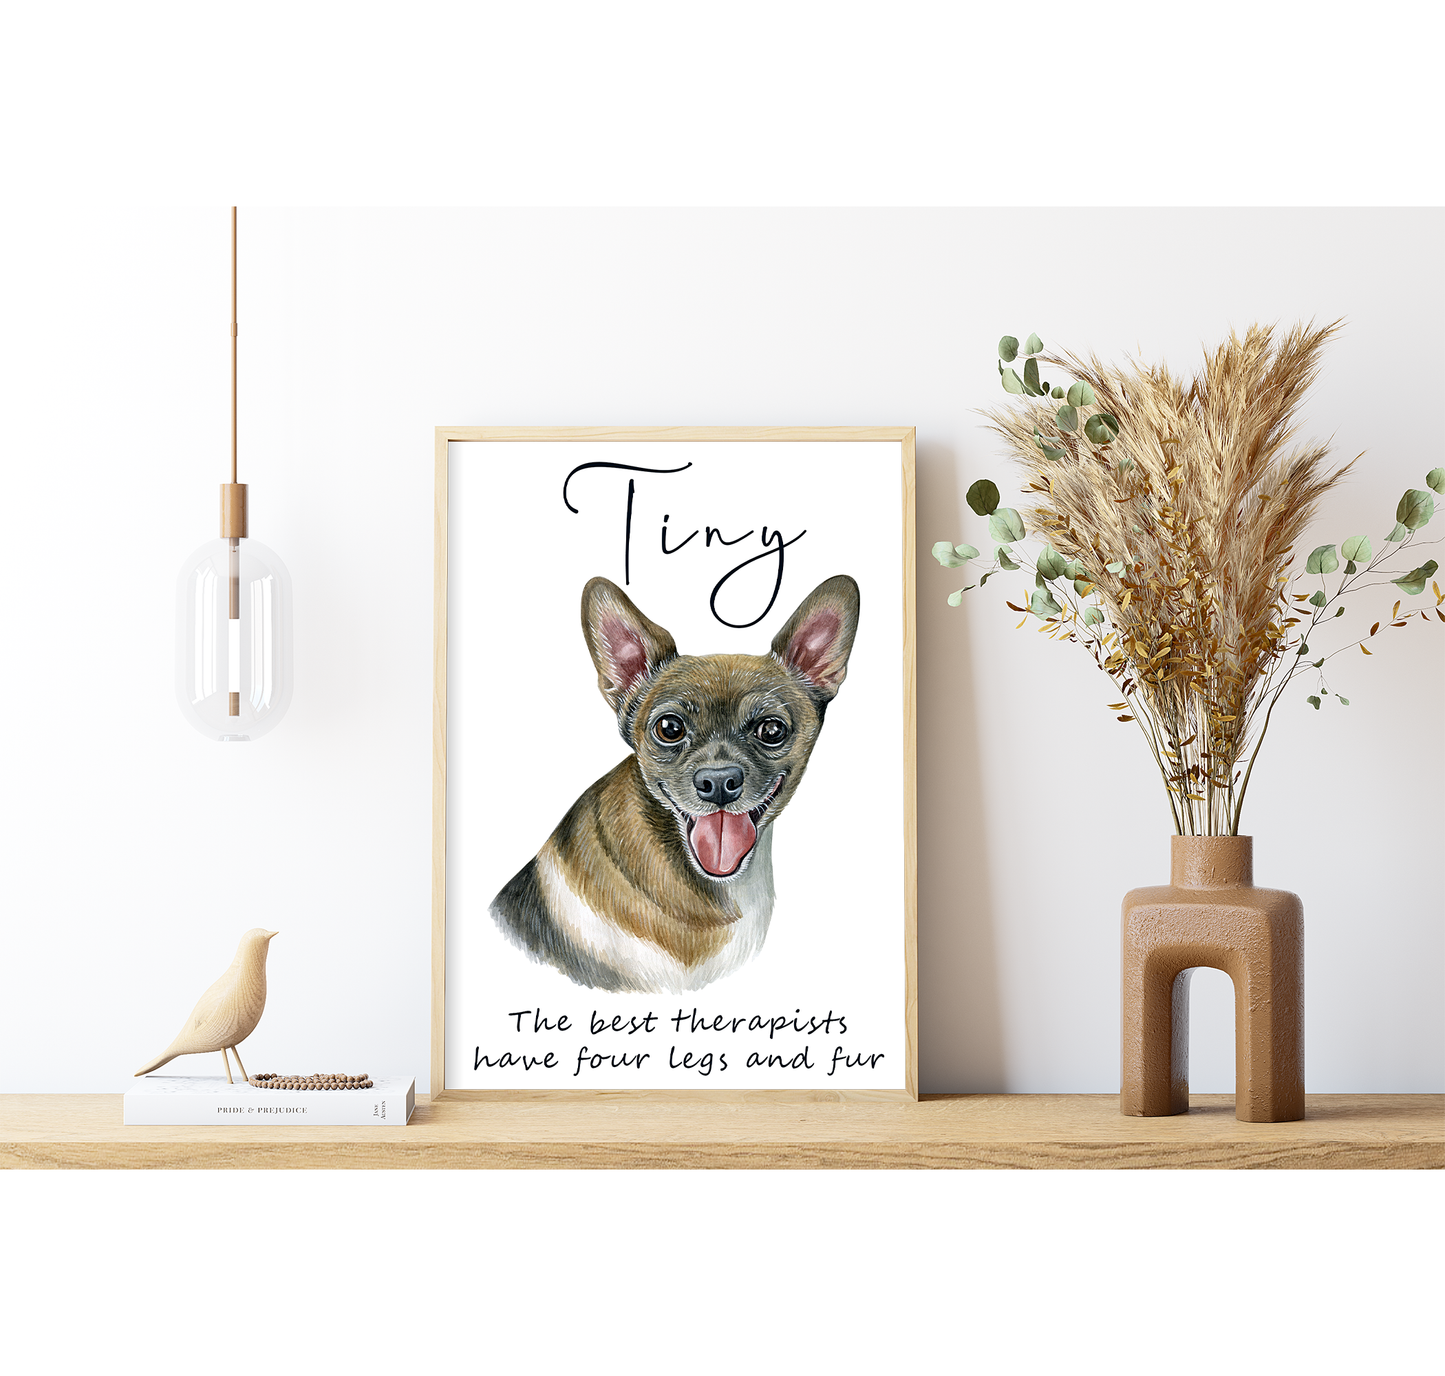 Chihuahua artwork - charming portraits of smallest dog with custom funny or heart warming message | A4 | A5 | Greeting card